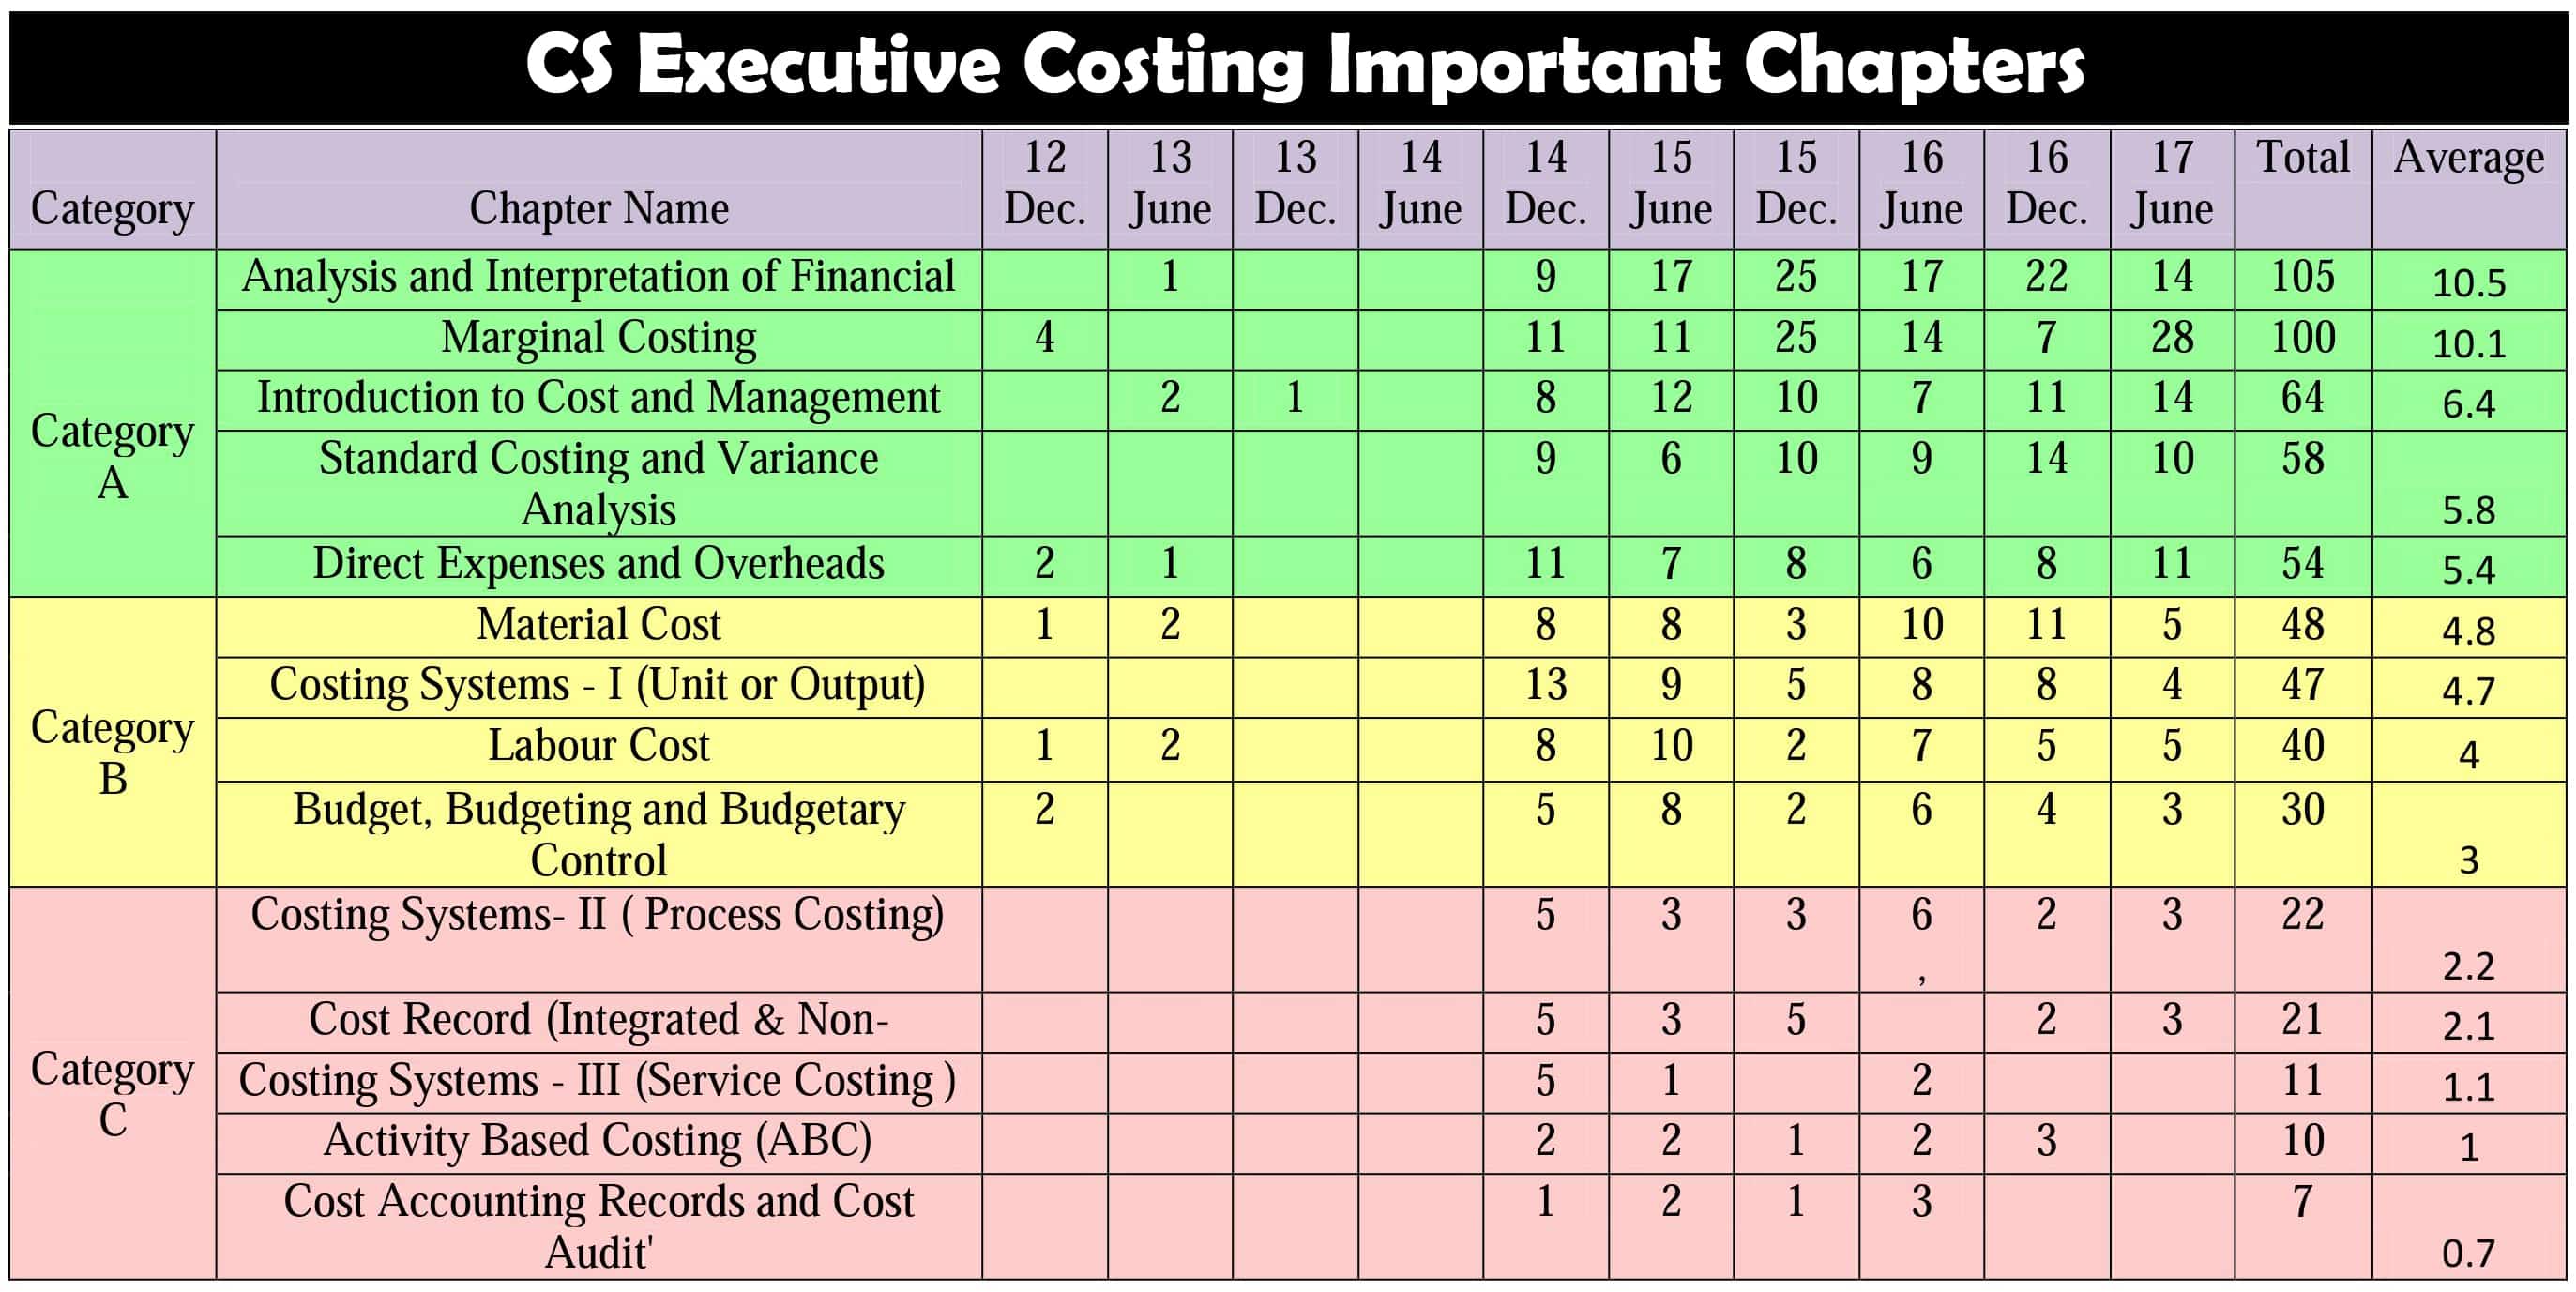 CS Executive Costing Important Chapters